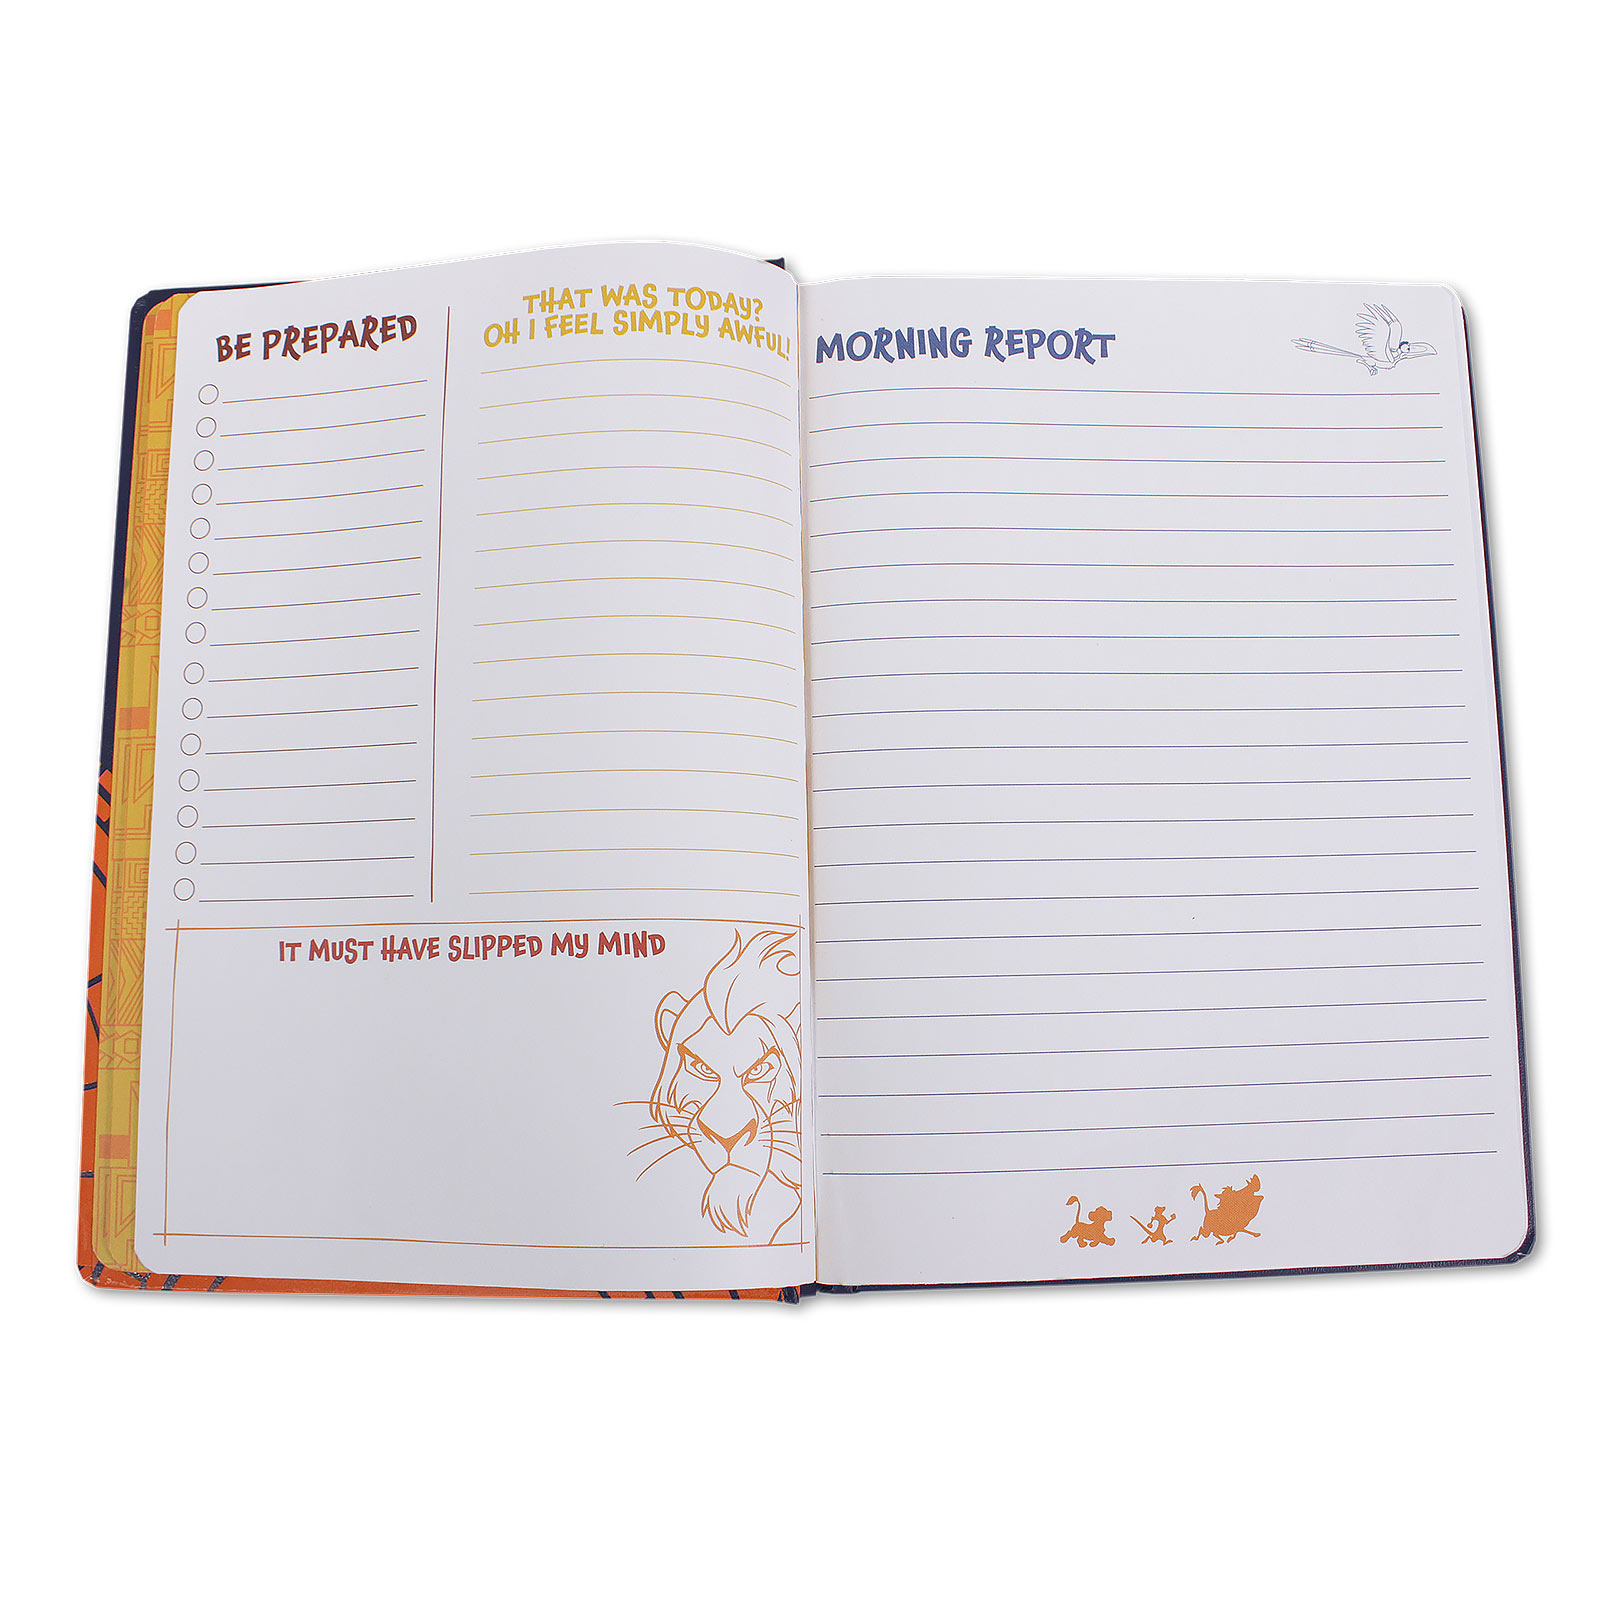 The Lion King - No Worries Notebook A5